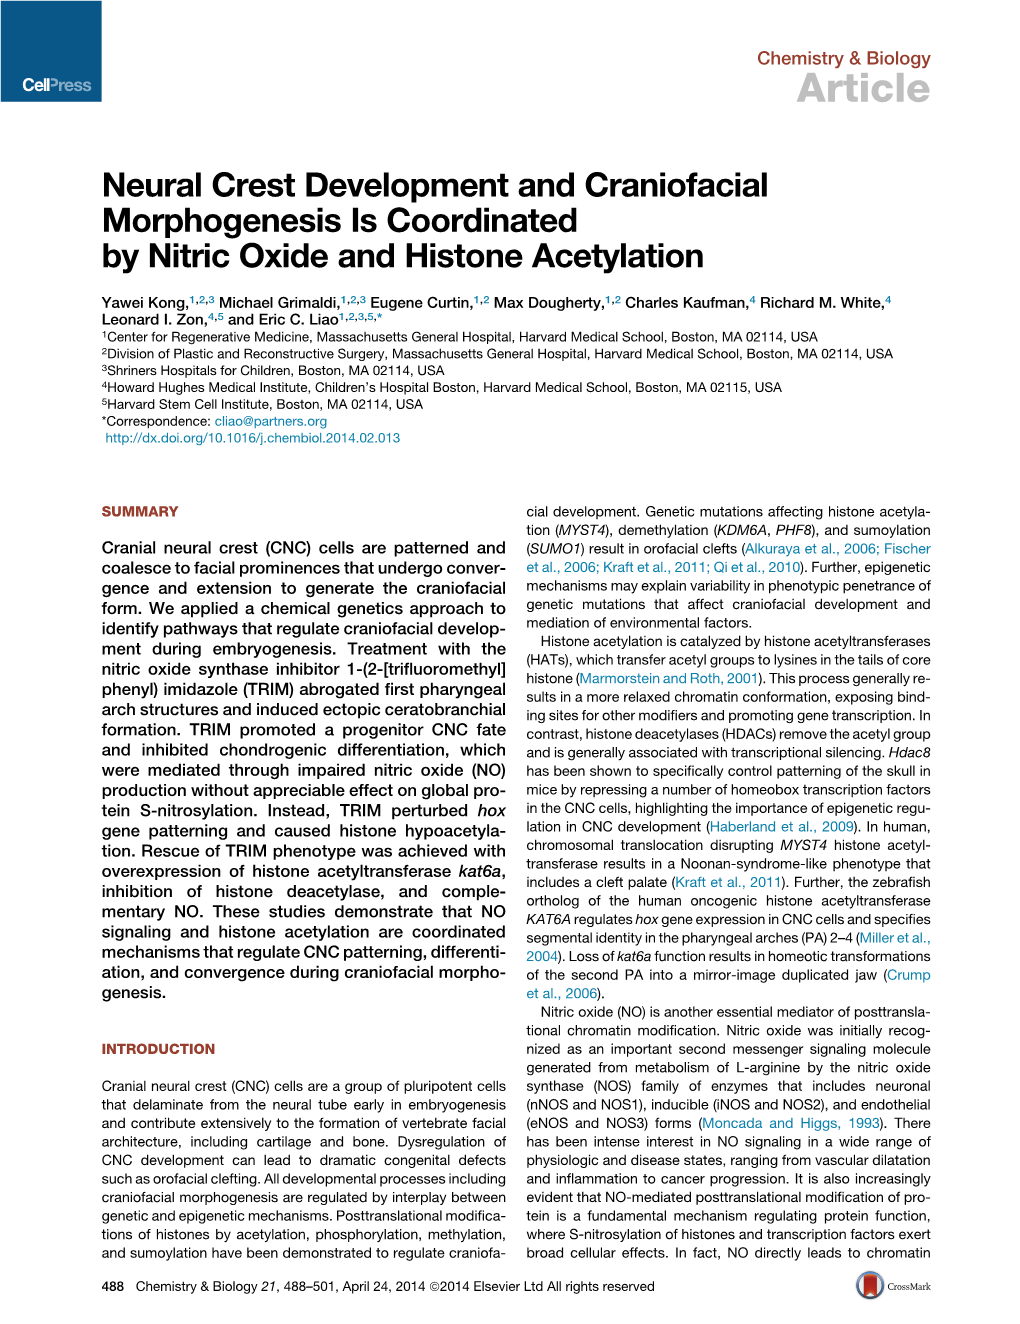 Neural Crest Development and Craniofacial Morphogenesis Is Coordinated by Nitric Oxide and Histone Acetylation